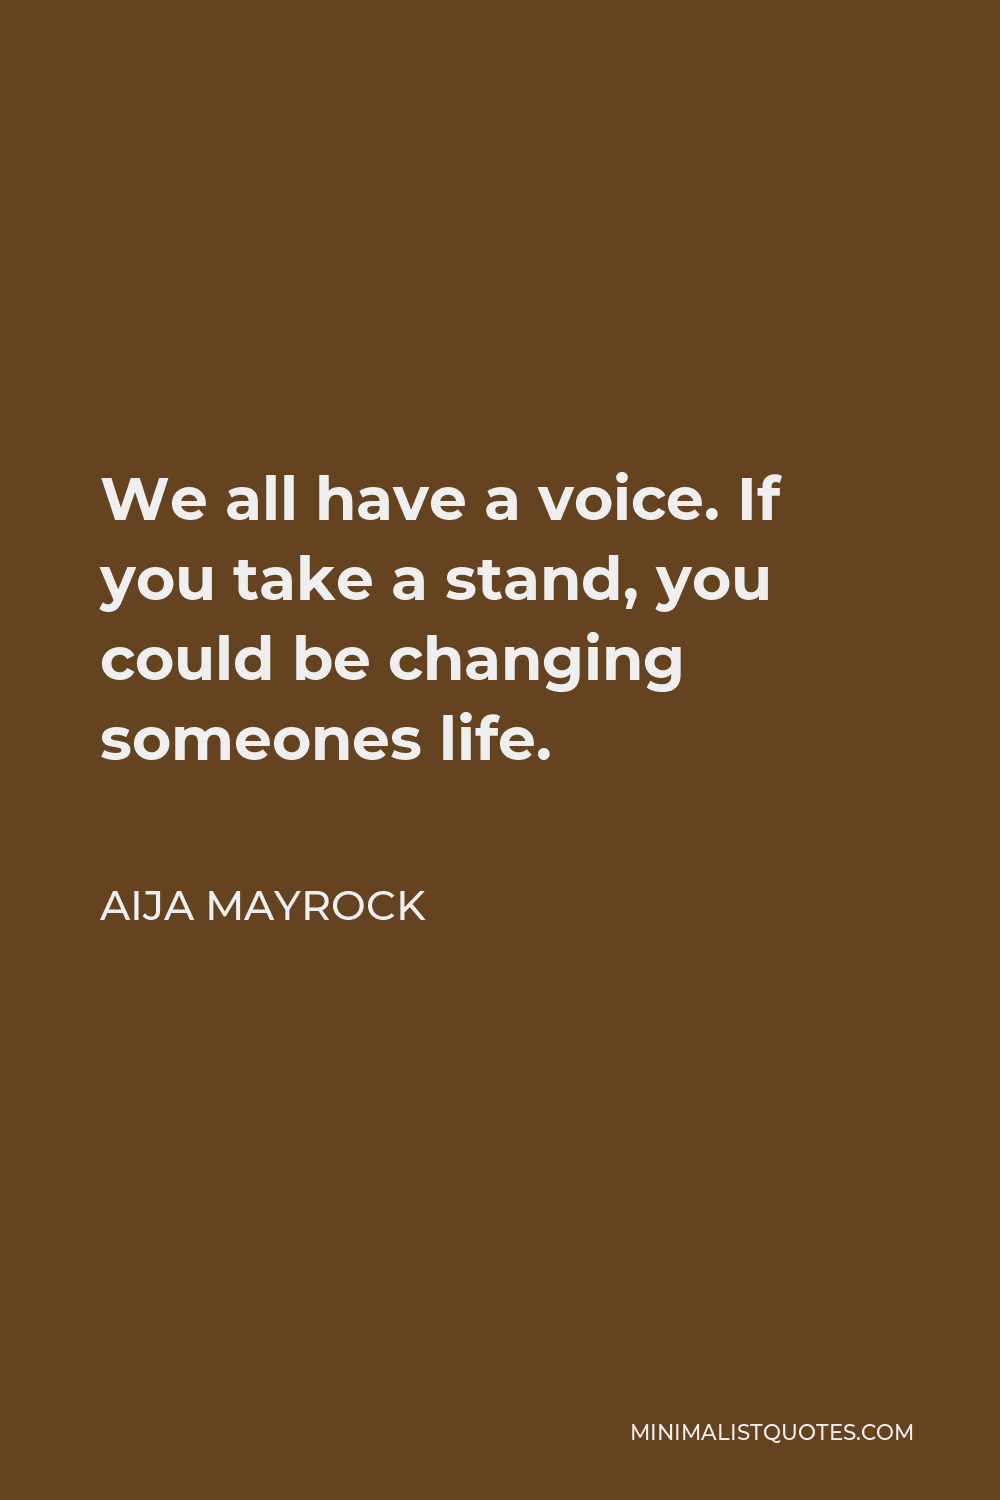 Aija Mayrock Quote - We all have a voice. If you take a stand, you could be changing someones life.